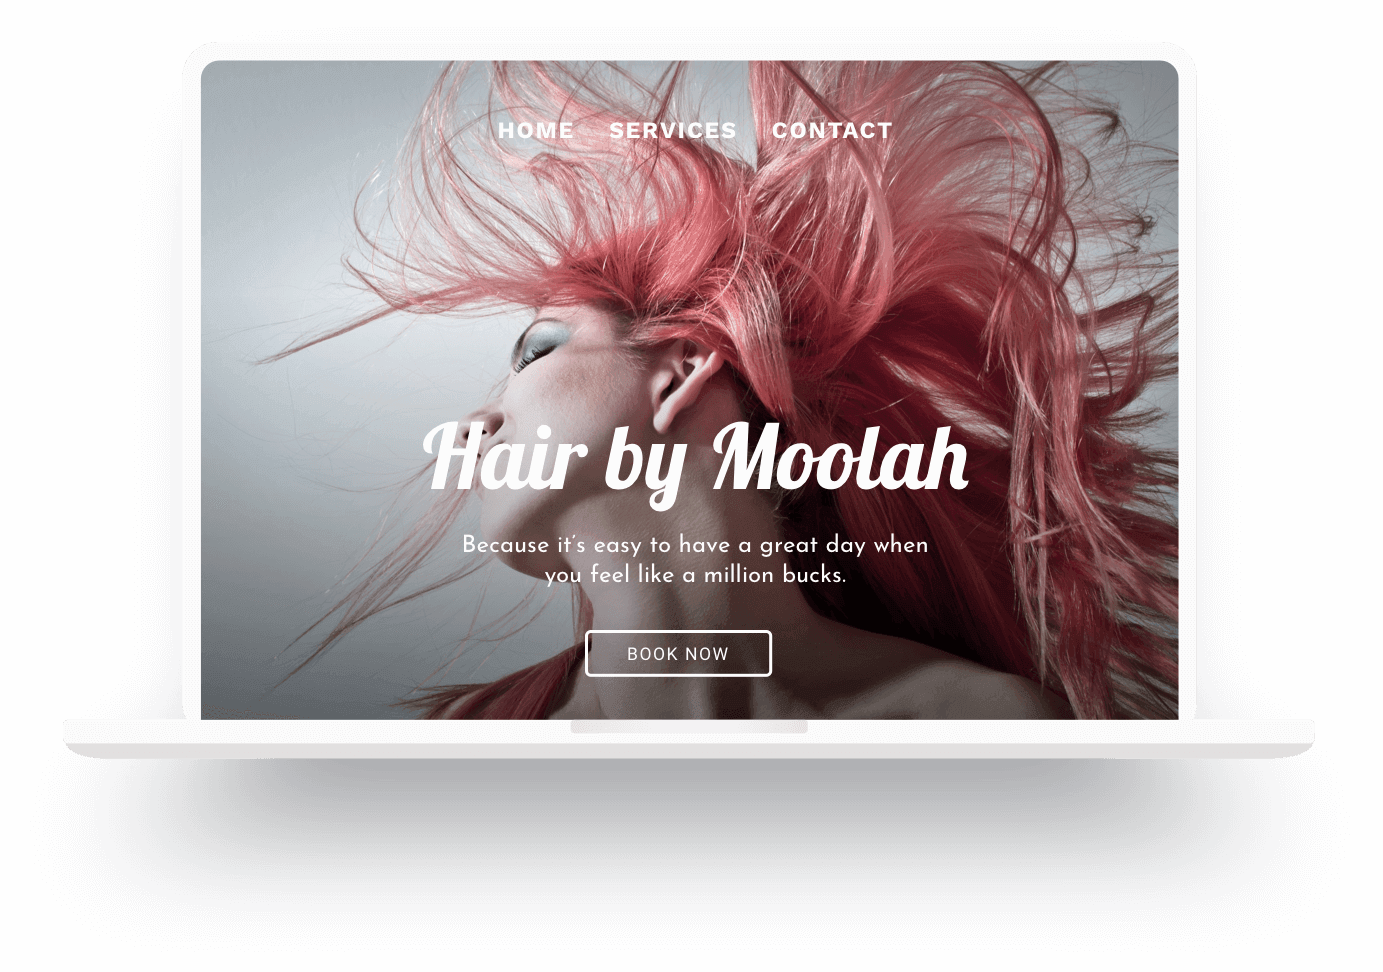 Example of a hair salon website made with Jimdo